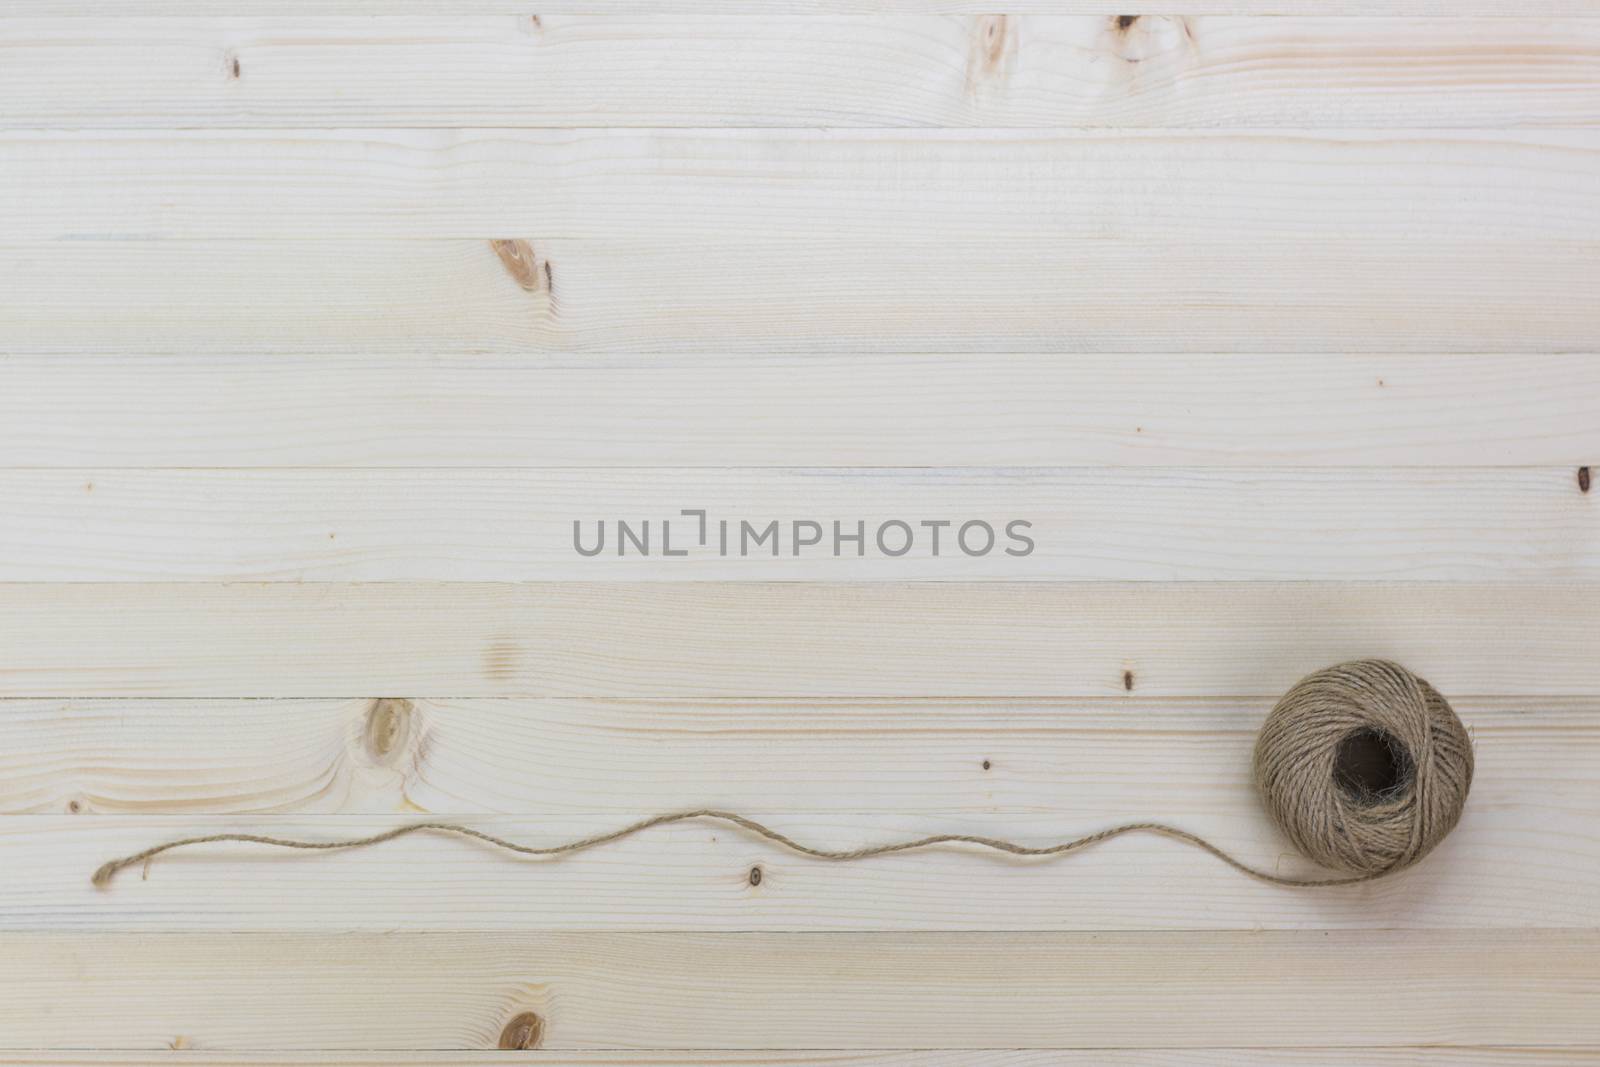 Hemp rope roll placed on a pine floor background.